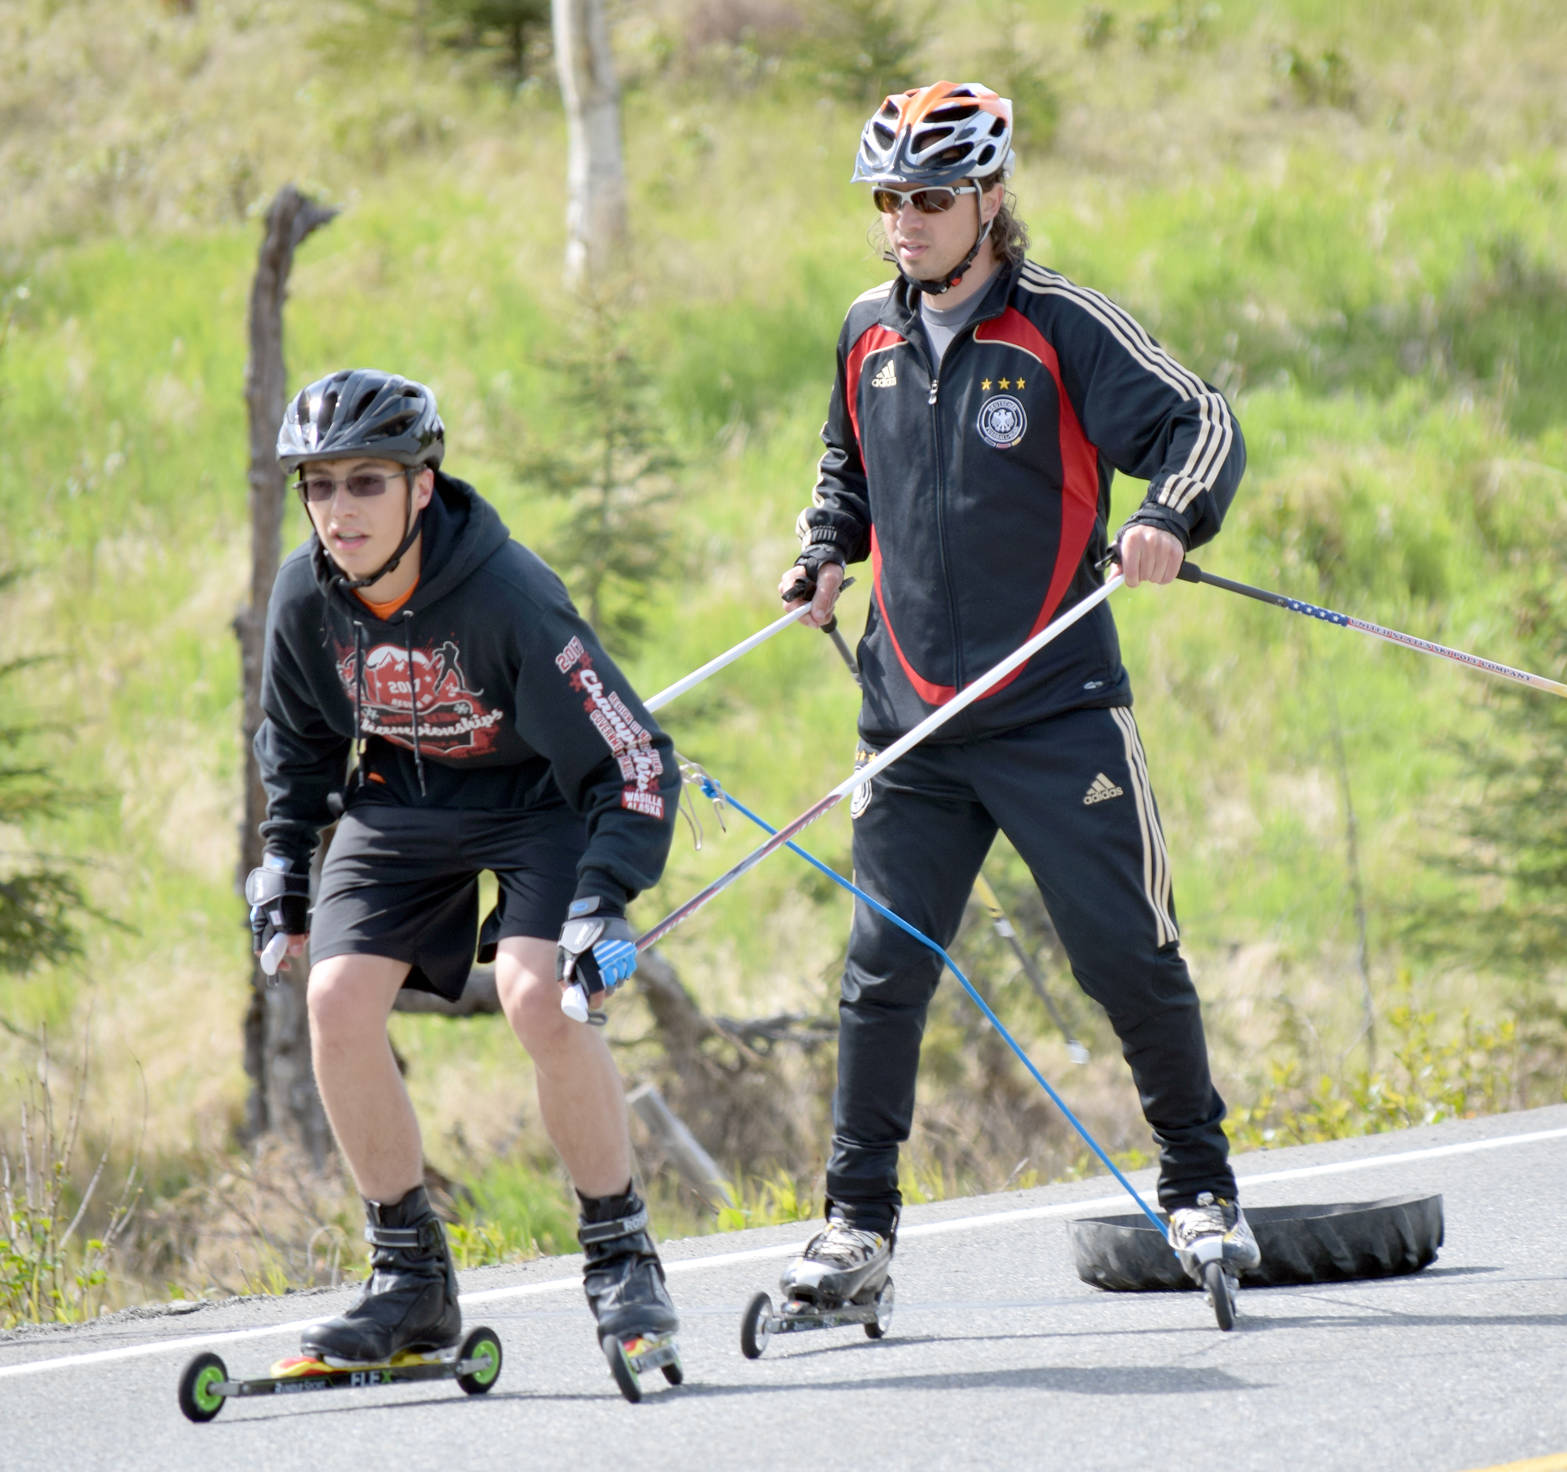 Bradley Walters, a sophomore at Soldotna High School, receives instruction from Andy Liebner on poling technique Monday, June 5, 2017, on South Cohoe Loop. (Photo by Jeff Helminiak/Peninsula Clarion)